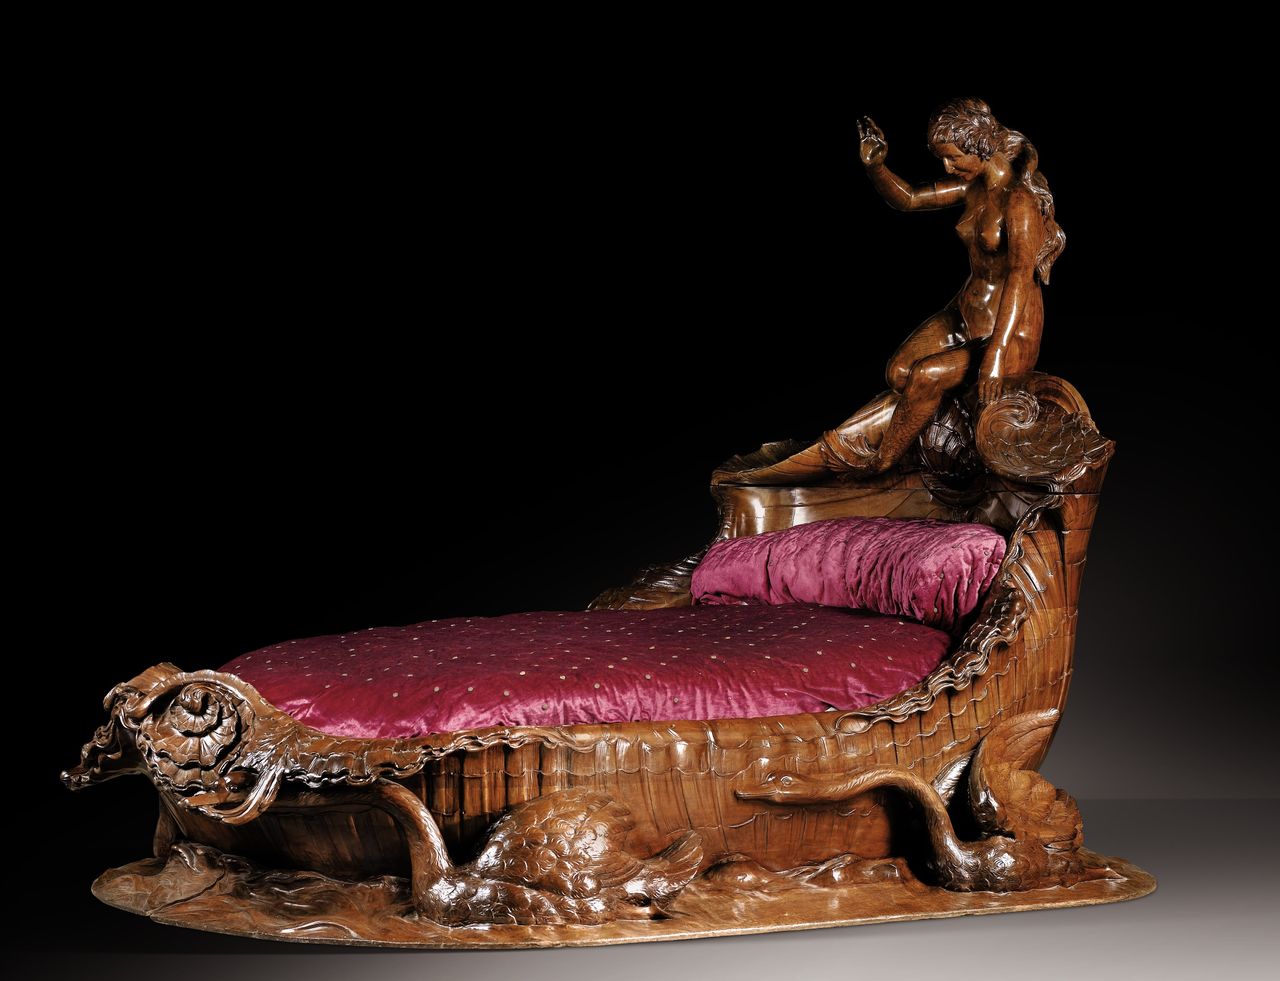 An exceptional carved mahogany bed, second half 19th century. (Est. £500,000 to £800,000.)